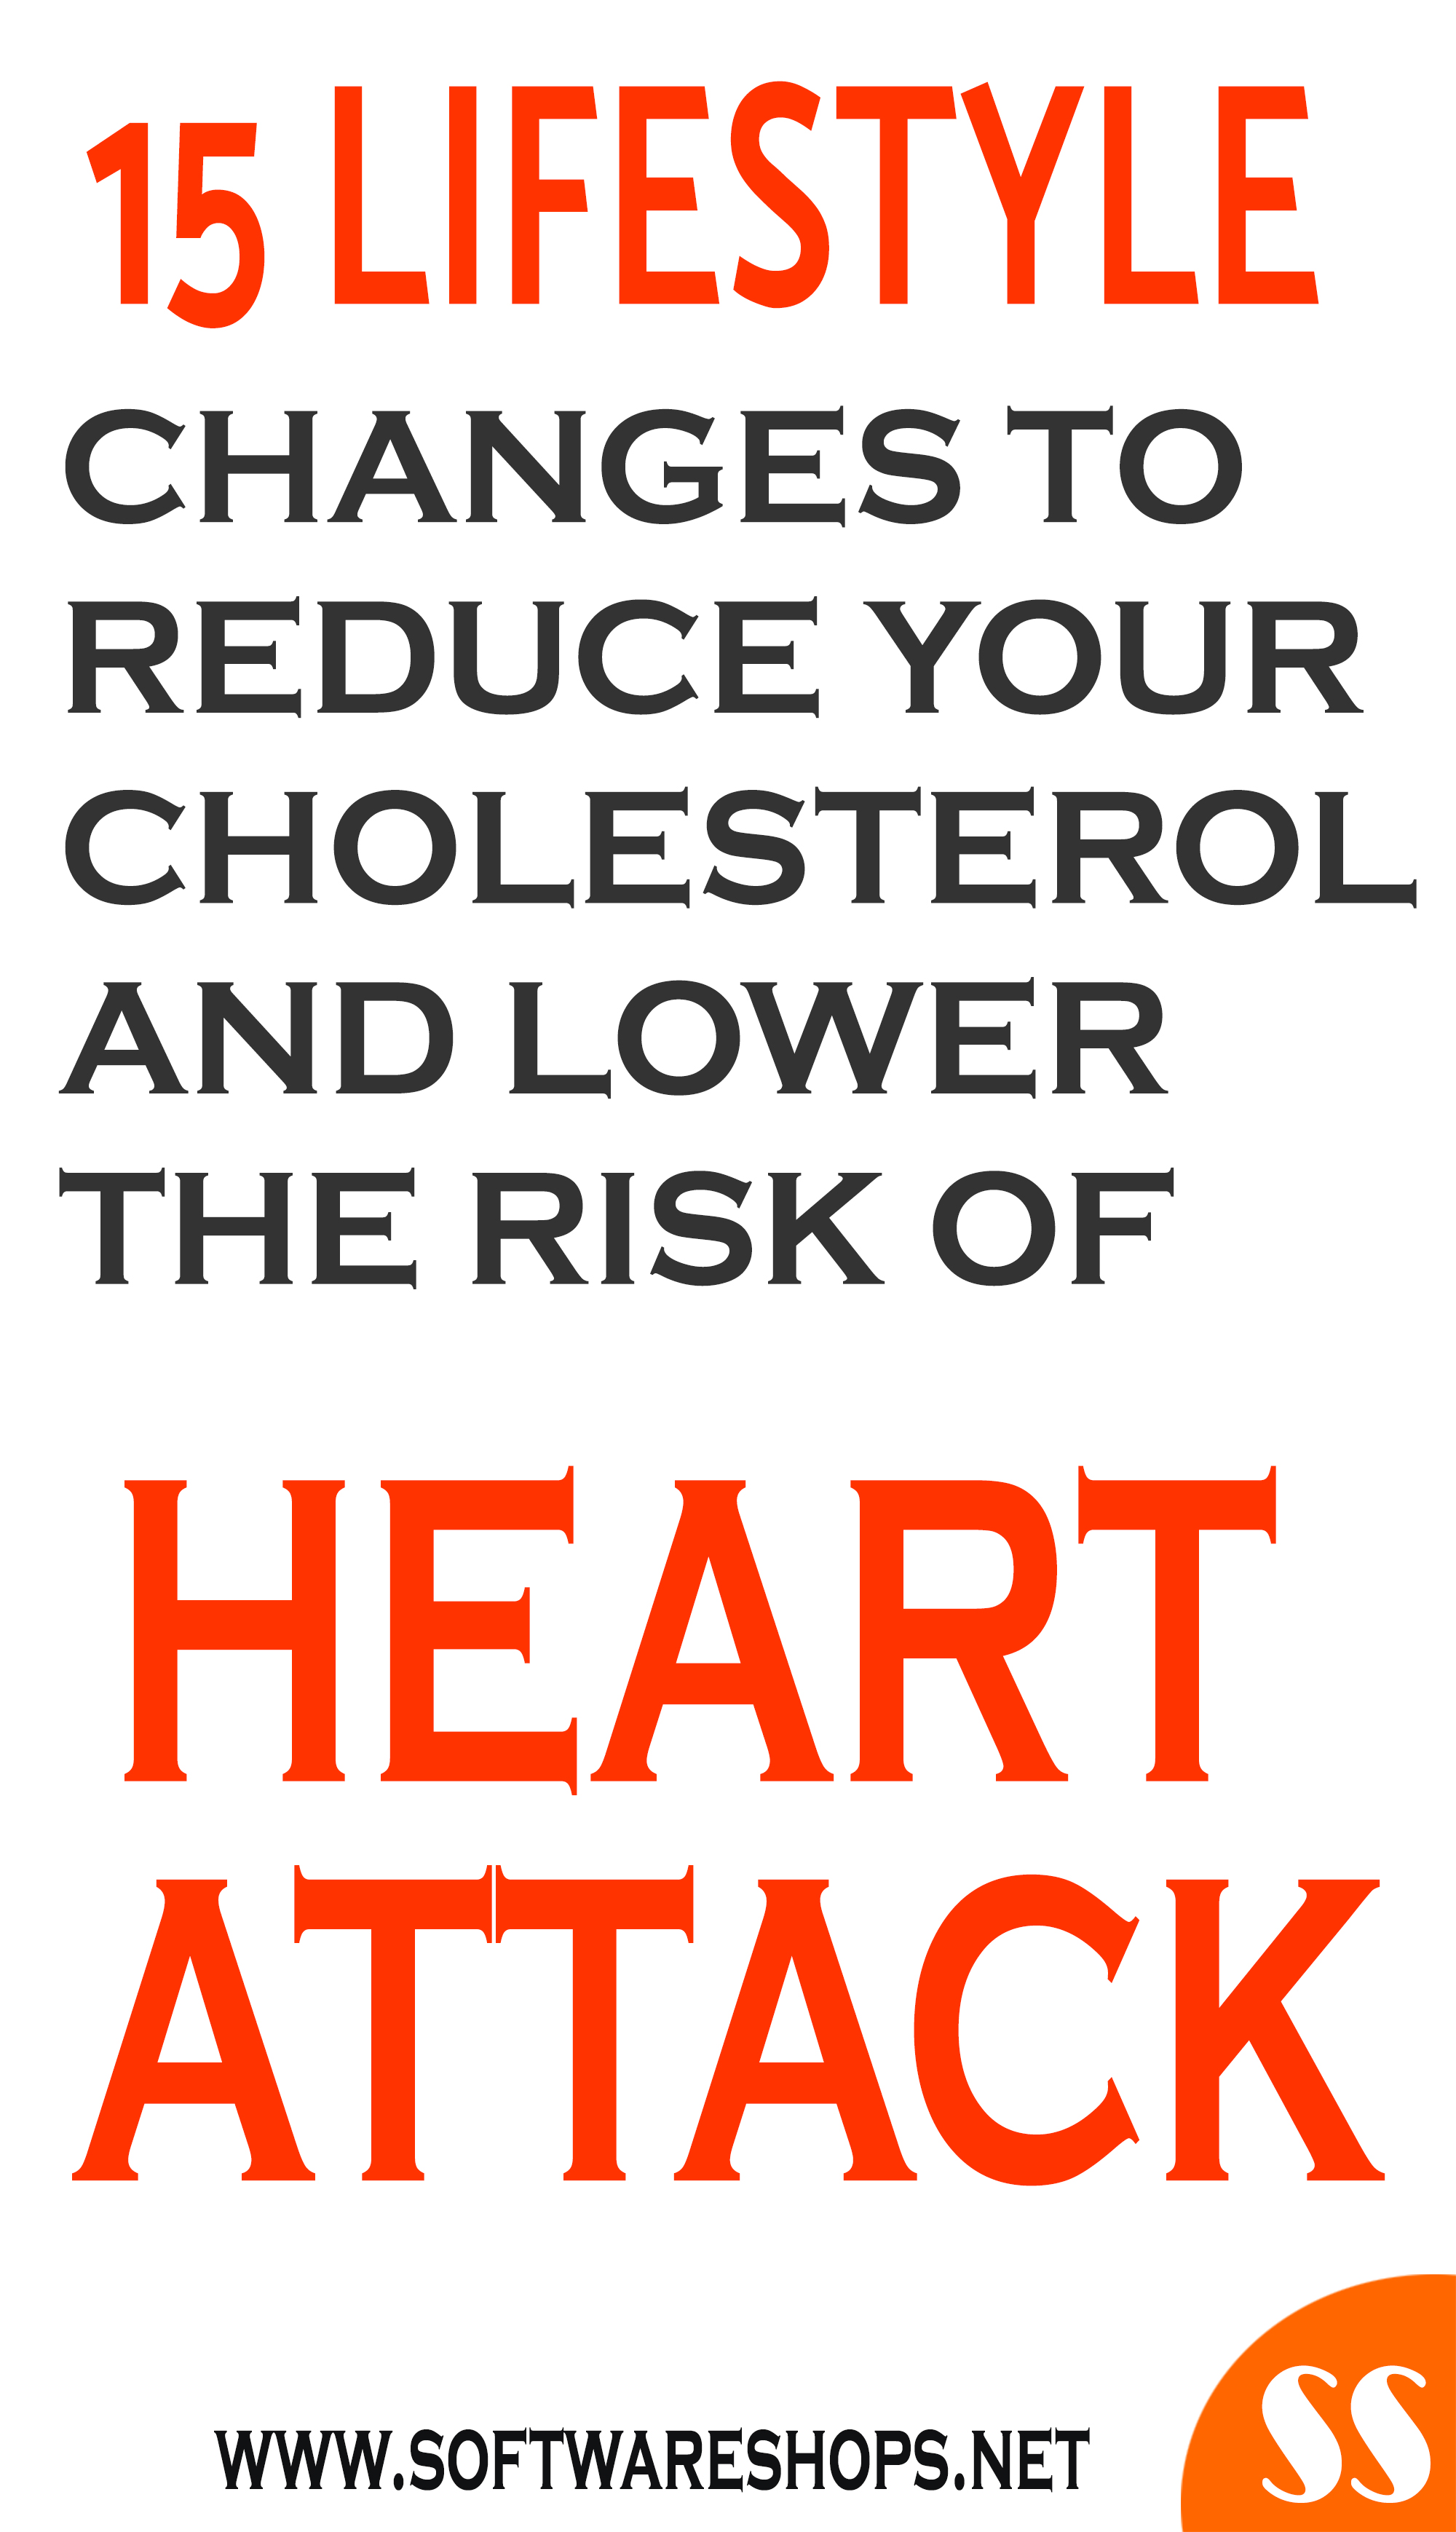 15 LIFESTYLE CHANGES TO REDUCE YOUR CHOLESTEROL AND LOWER THE RISK OF HEART ATTACK